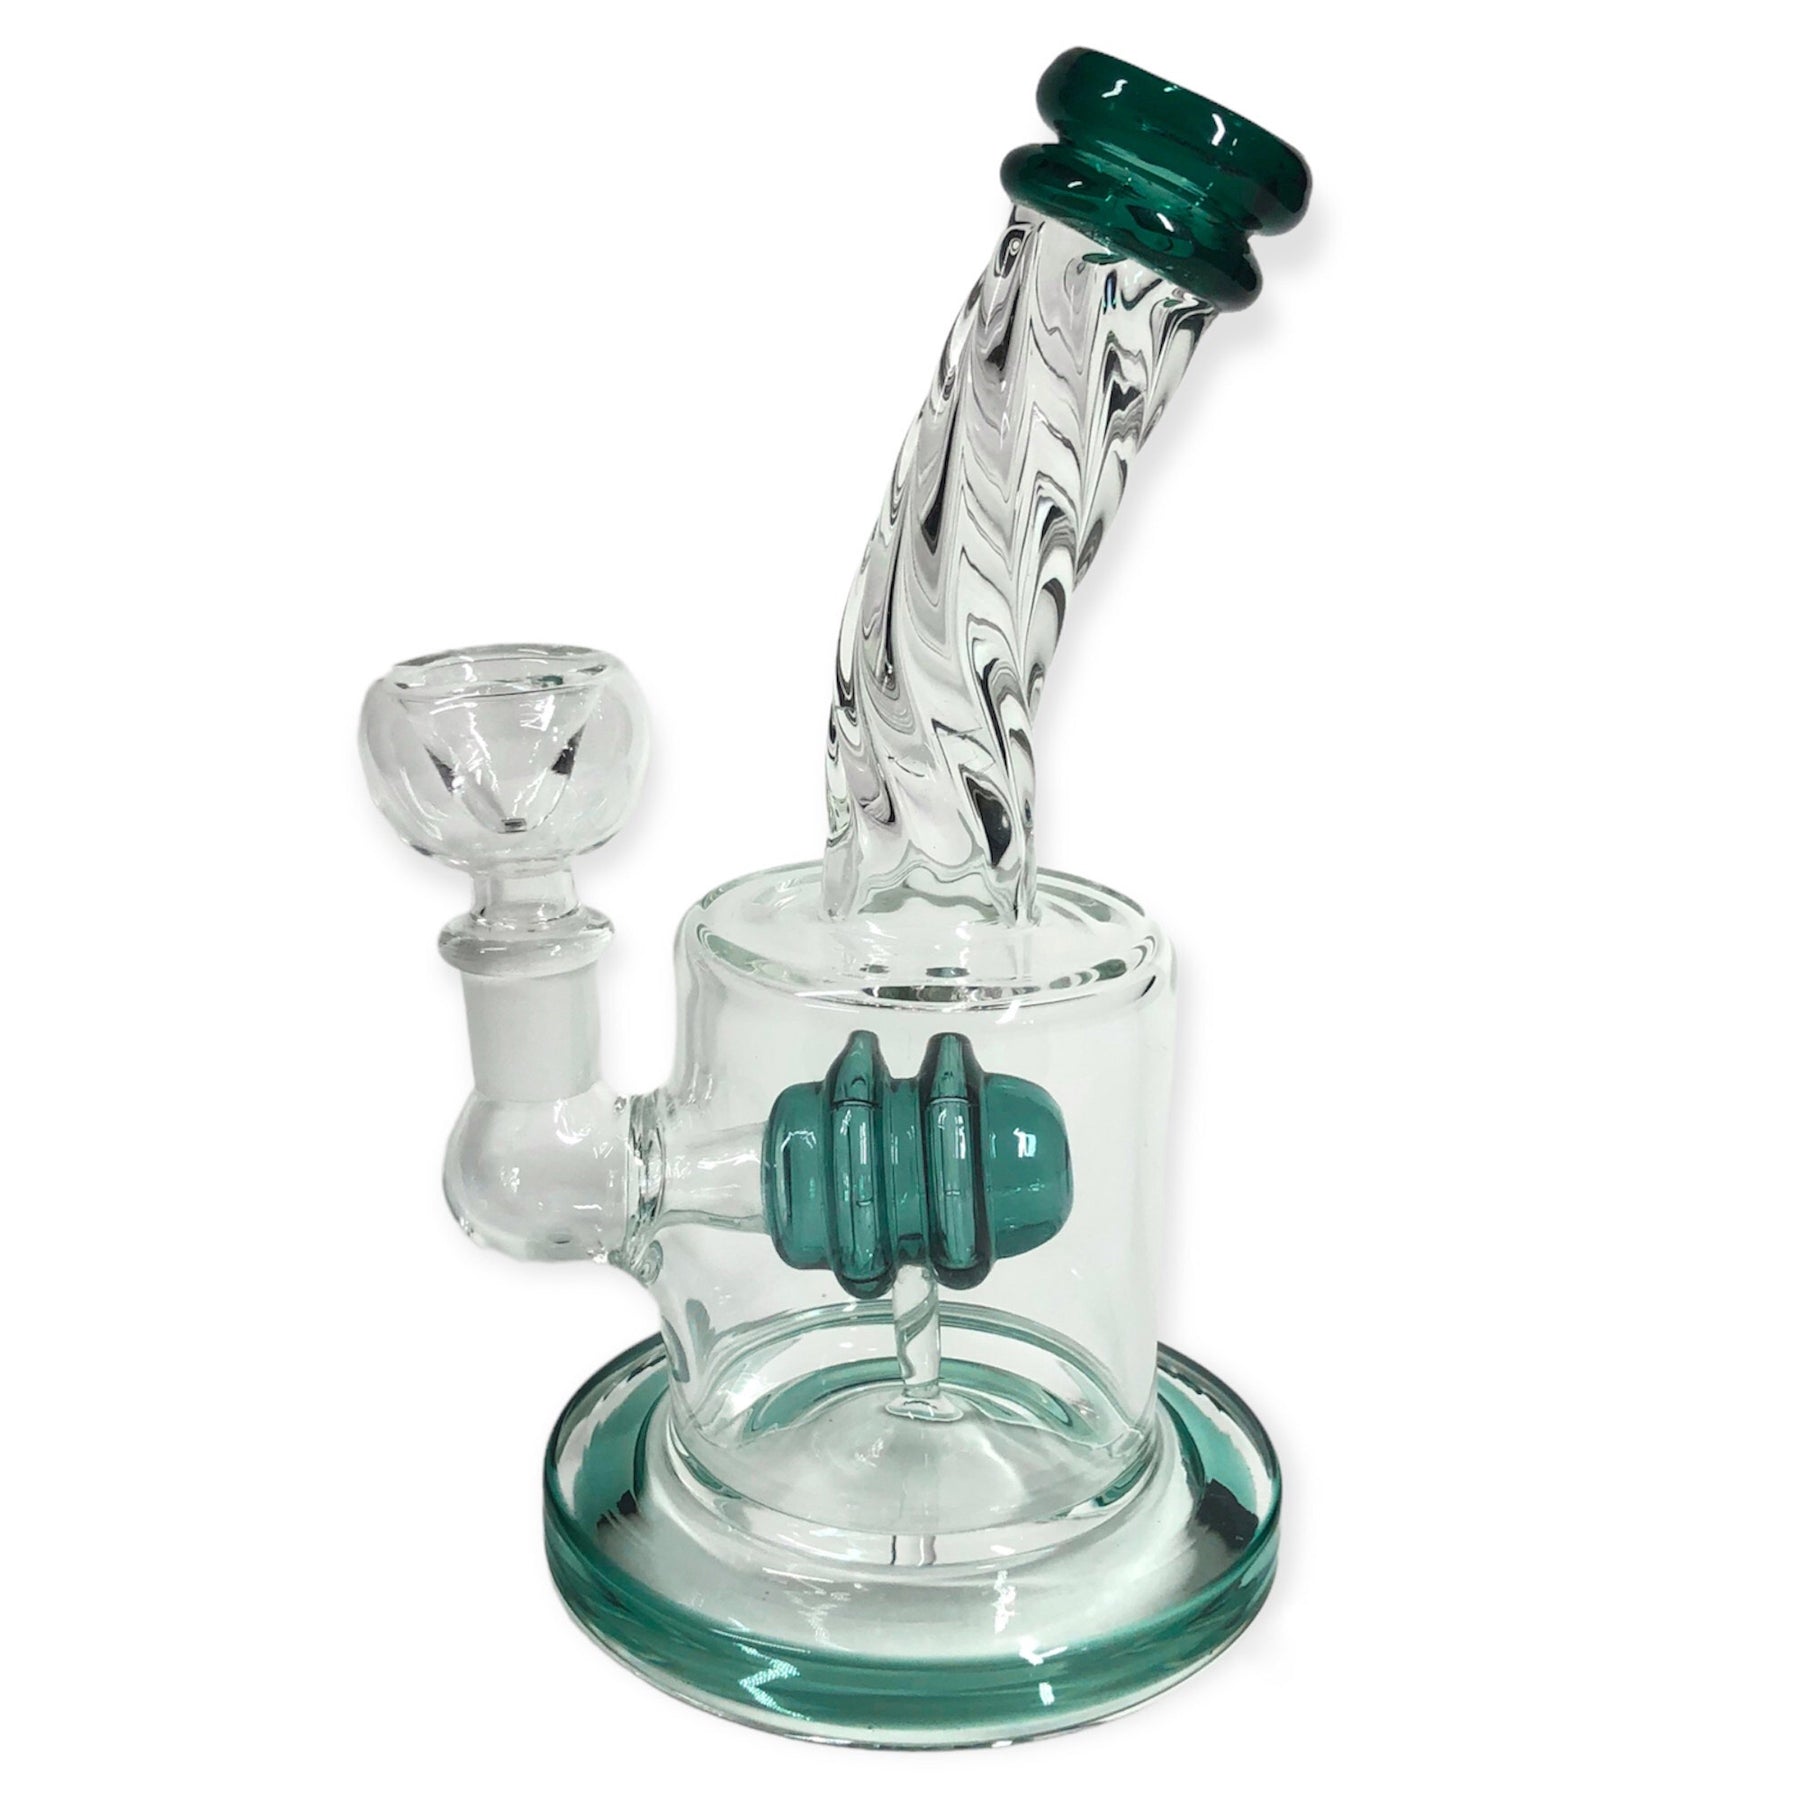 Twisted Neck Bong with Percolator - Golden Leaf Shop